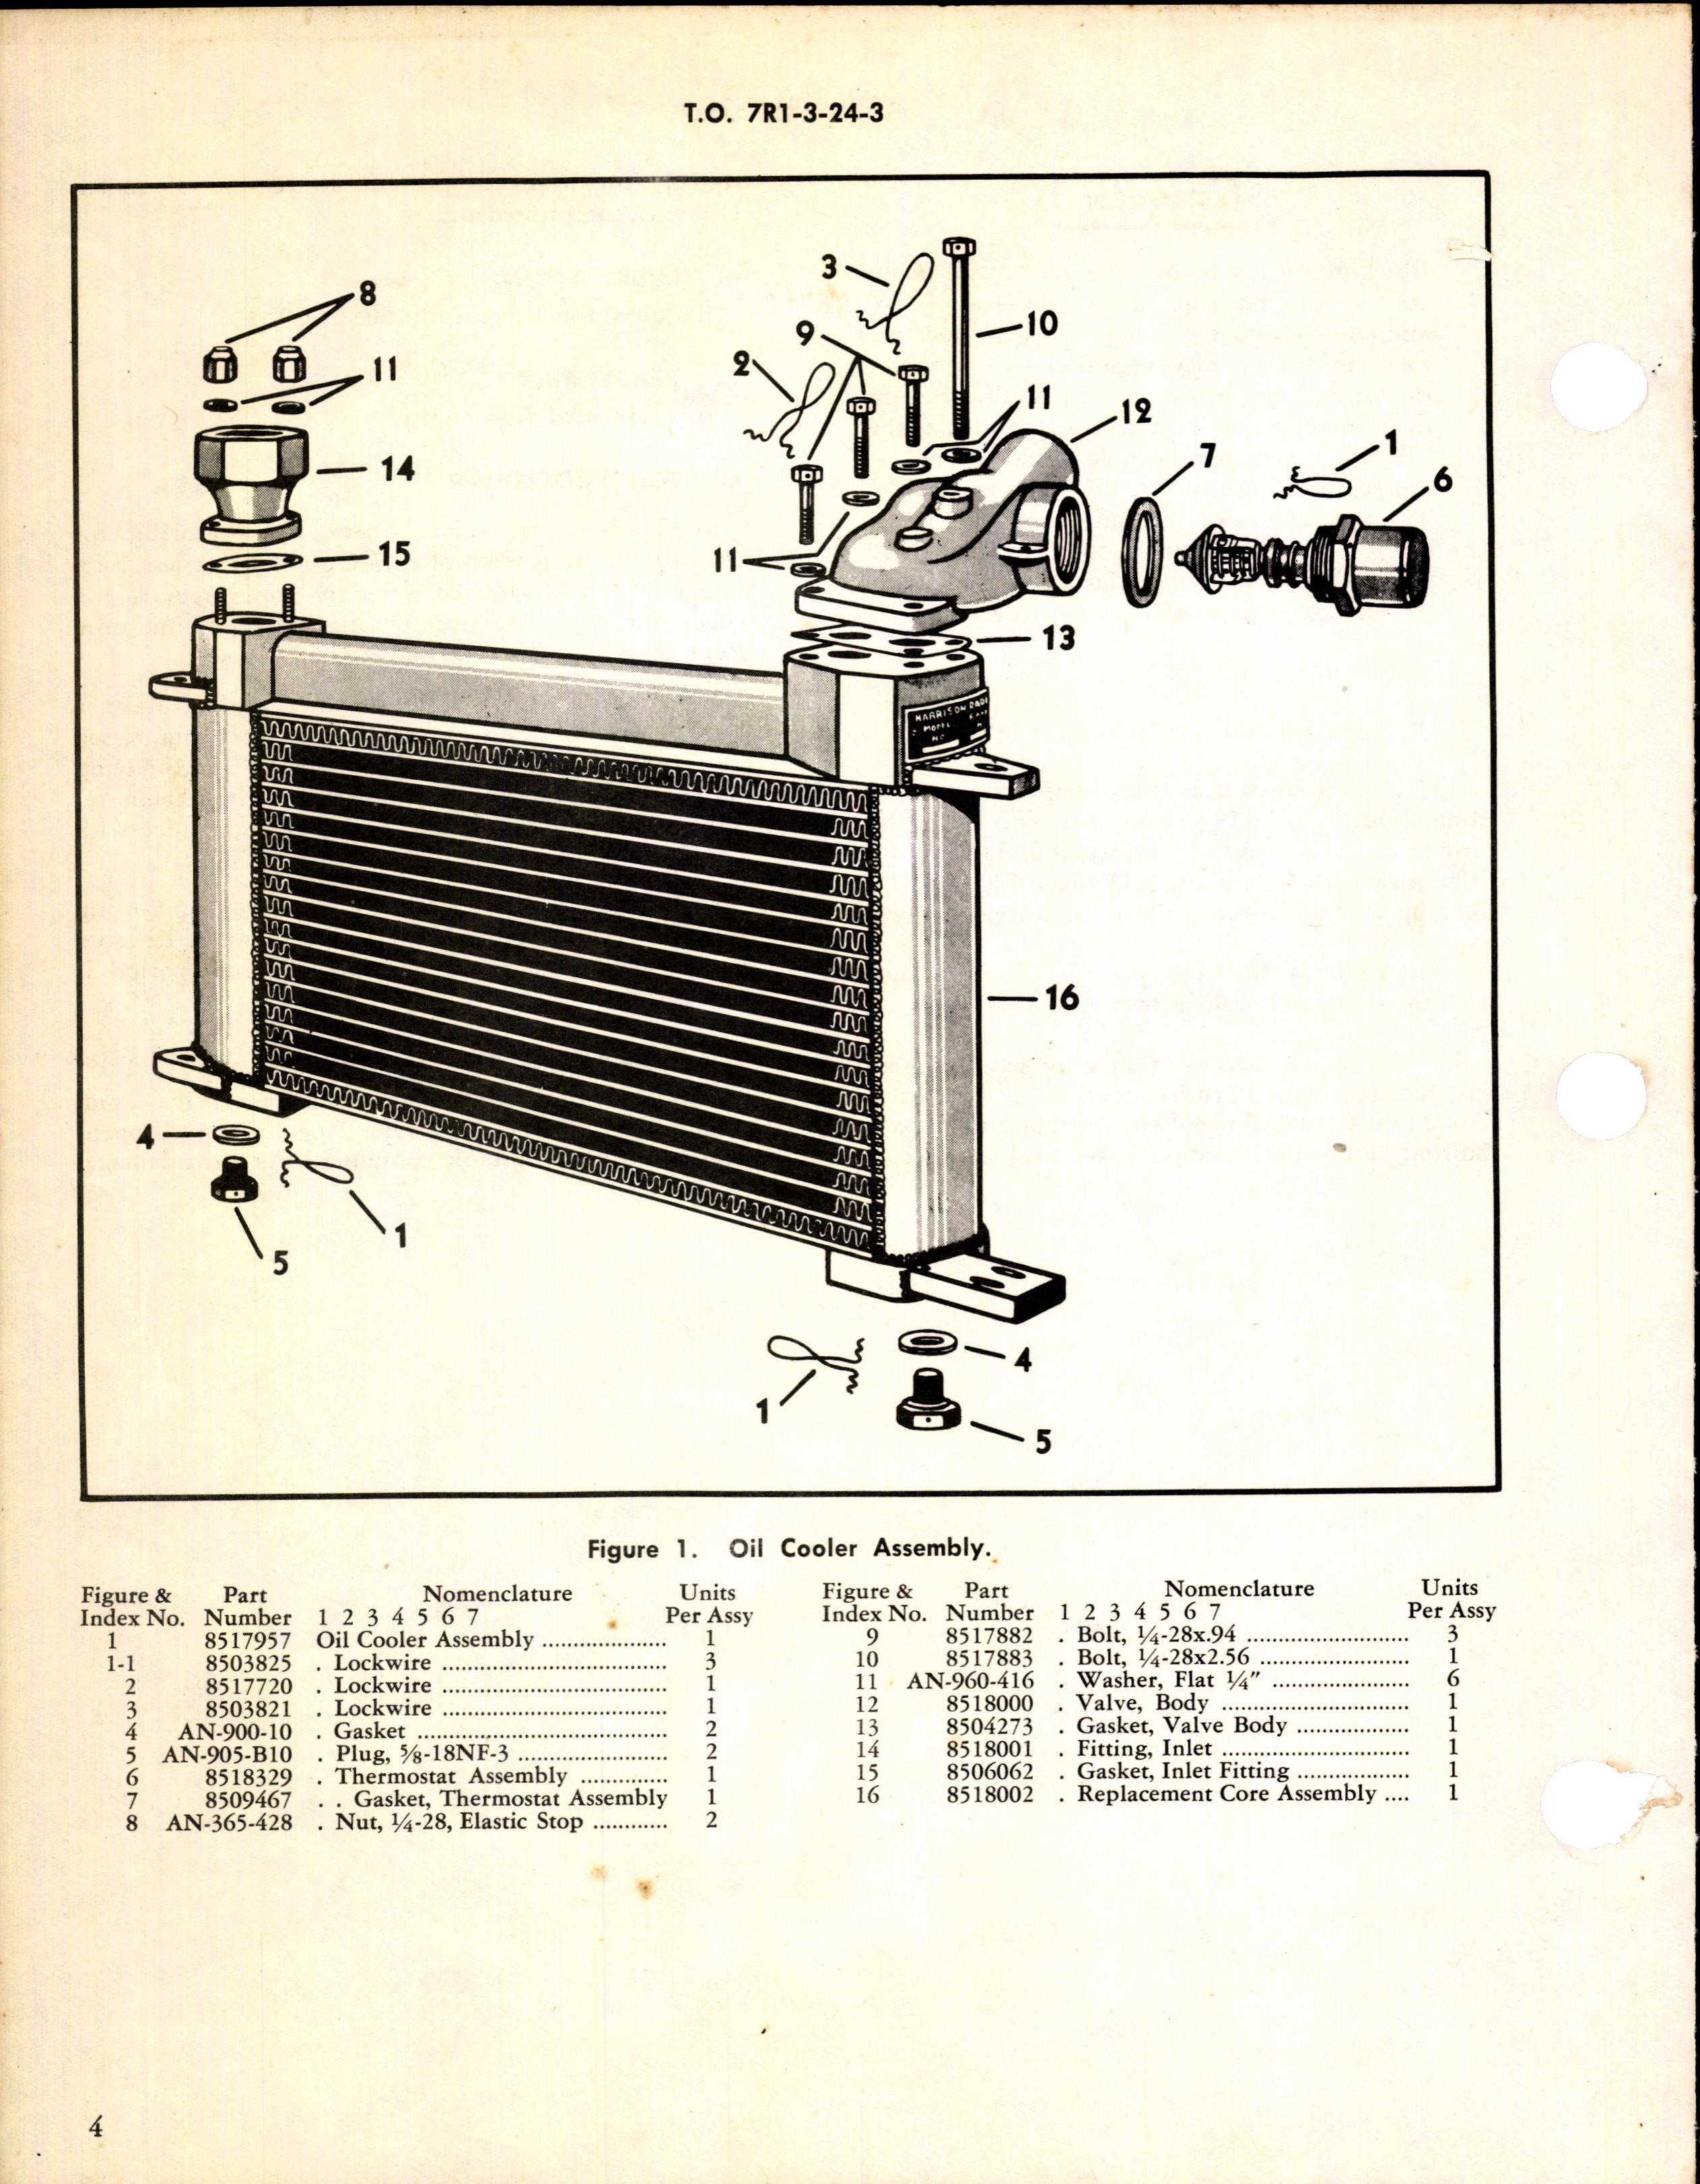 Sample page 4 from AirCorps Library document: Overhaul Instructions with Parts Breakdown for Oil Cooler Assembly